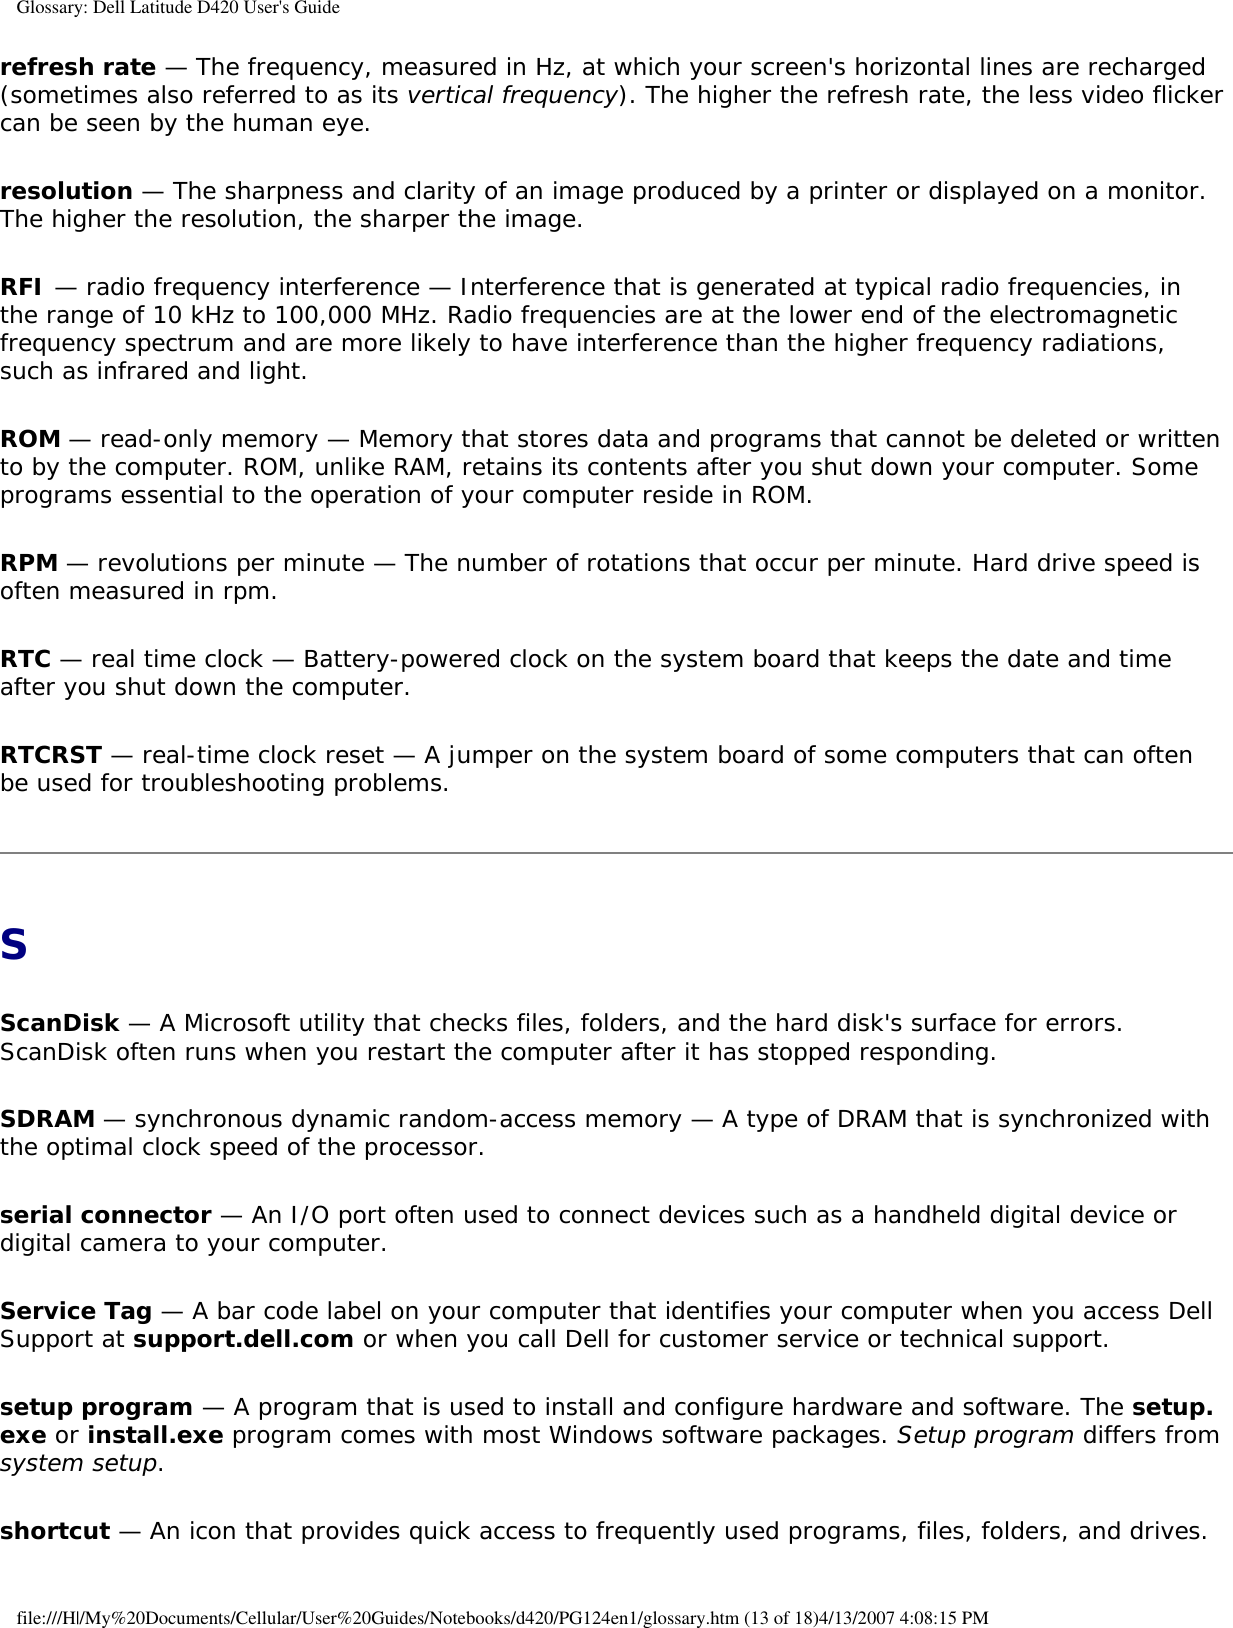 Glossary: Dell Latitude D420 User&apos;s Guiderefresh rate — The frequency, measured in Hz, at which your screen&apos;s horizontal lines are recharged (sometimes also referred to as its vertical frequency). The higher the refresh rate, the less video flicker can be seen by the human eye.resolution — The sharpness and clarity of an image produced by a printer or displayed on a monitor. The higher the resolution, the sharper the image.RFI — radio frequency interference — Interference that is generated at typical radio frequencies, in the range of 10 kHz to 100,000 MHz. Radio frequencies are at the lower end of the electromagnetic frequency spectrum and are more likely to have interference than the higher frequency radiations, such as infrared and light.ROM — read-only memory — Memory that stores data and programs that cannot be deleted or written to by the computer. ROM, unlike RAM, retains its contents after you shut down your computer. Some programs essential to the operation of your computer reside in ROM.RPM — revolutions per minute — The number of rotations that occur per minute. Hard drive speed is often measured in rpm.RTC — real time clock — Battery-powered clock on the system board that keeps the date and time after you shut down the computer.RTCRST — real-time clock reset — A jumper on the system board of some computers that can often be used for troubleshooting problems.SScanDisk — A Microsoft utility that checks files, folders, and the hard disk&apos;s surface for errors. ScanDisk often runs when you restart the computer after it has stopped responding.SDRAM — synchronous dynamic random-access memory — A type of DRAM that is synchronized with the optimal clock speed of the processor.serial connector — An I/O port often used to connect devices such as a handheld digital device or digital camera to your computer.Service Tag — A bar code label on your computer that identifies your computer when you access Dell Support at support.dell.com or when you call Dell for customer service or technical support.setup program — A program that is used to install and configure hardware and software. The setup.exe or install.exe program comes with most Windows software packages. Setup program differs from system setup.shortcut — An icon that provides quick access to frequently used programs, files, folders, and drives. file:///H|/My%20Documents/Cellular/User%20Guides/Notebooks/d420/PG124en1/glossary.htm (13 of 18)4/13/2007 4:08:15 PM